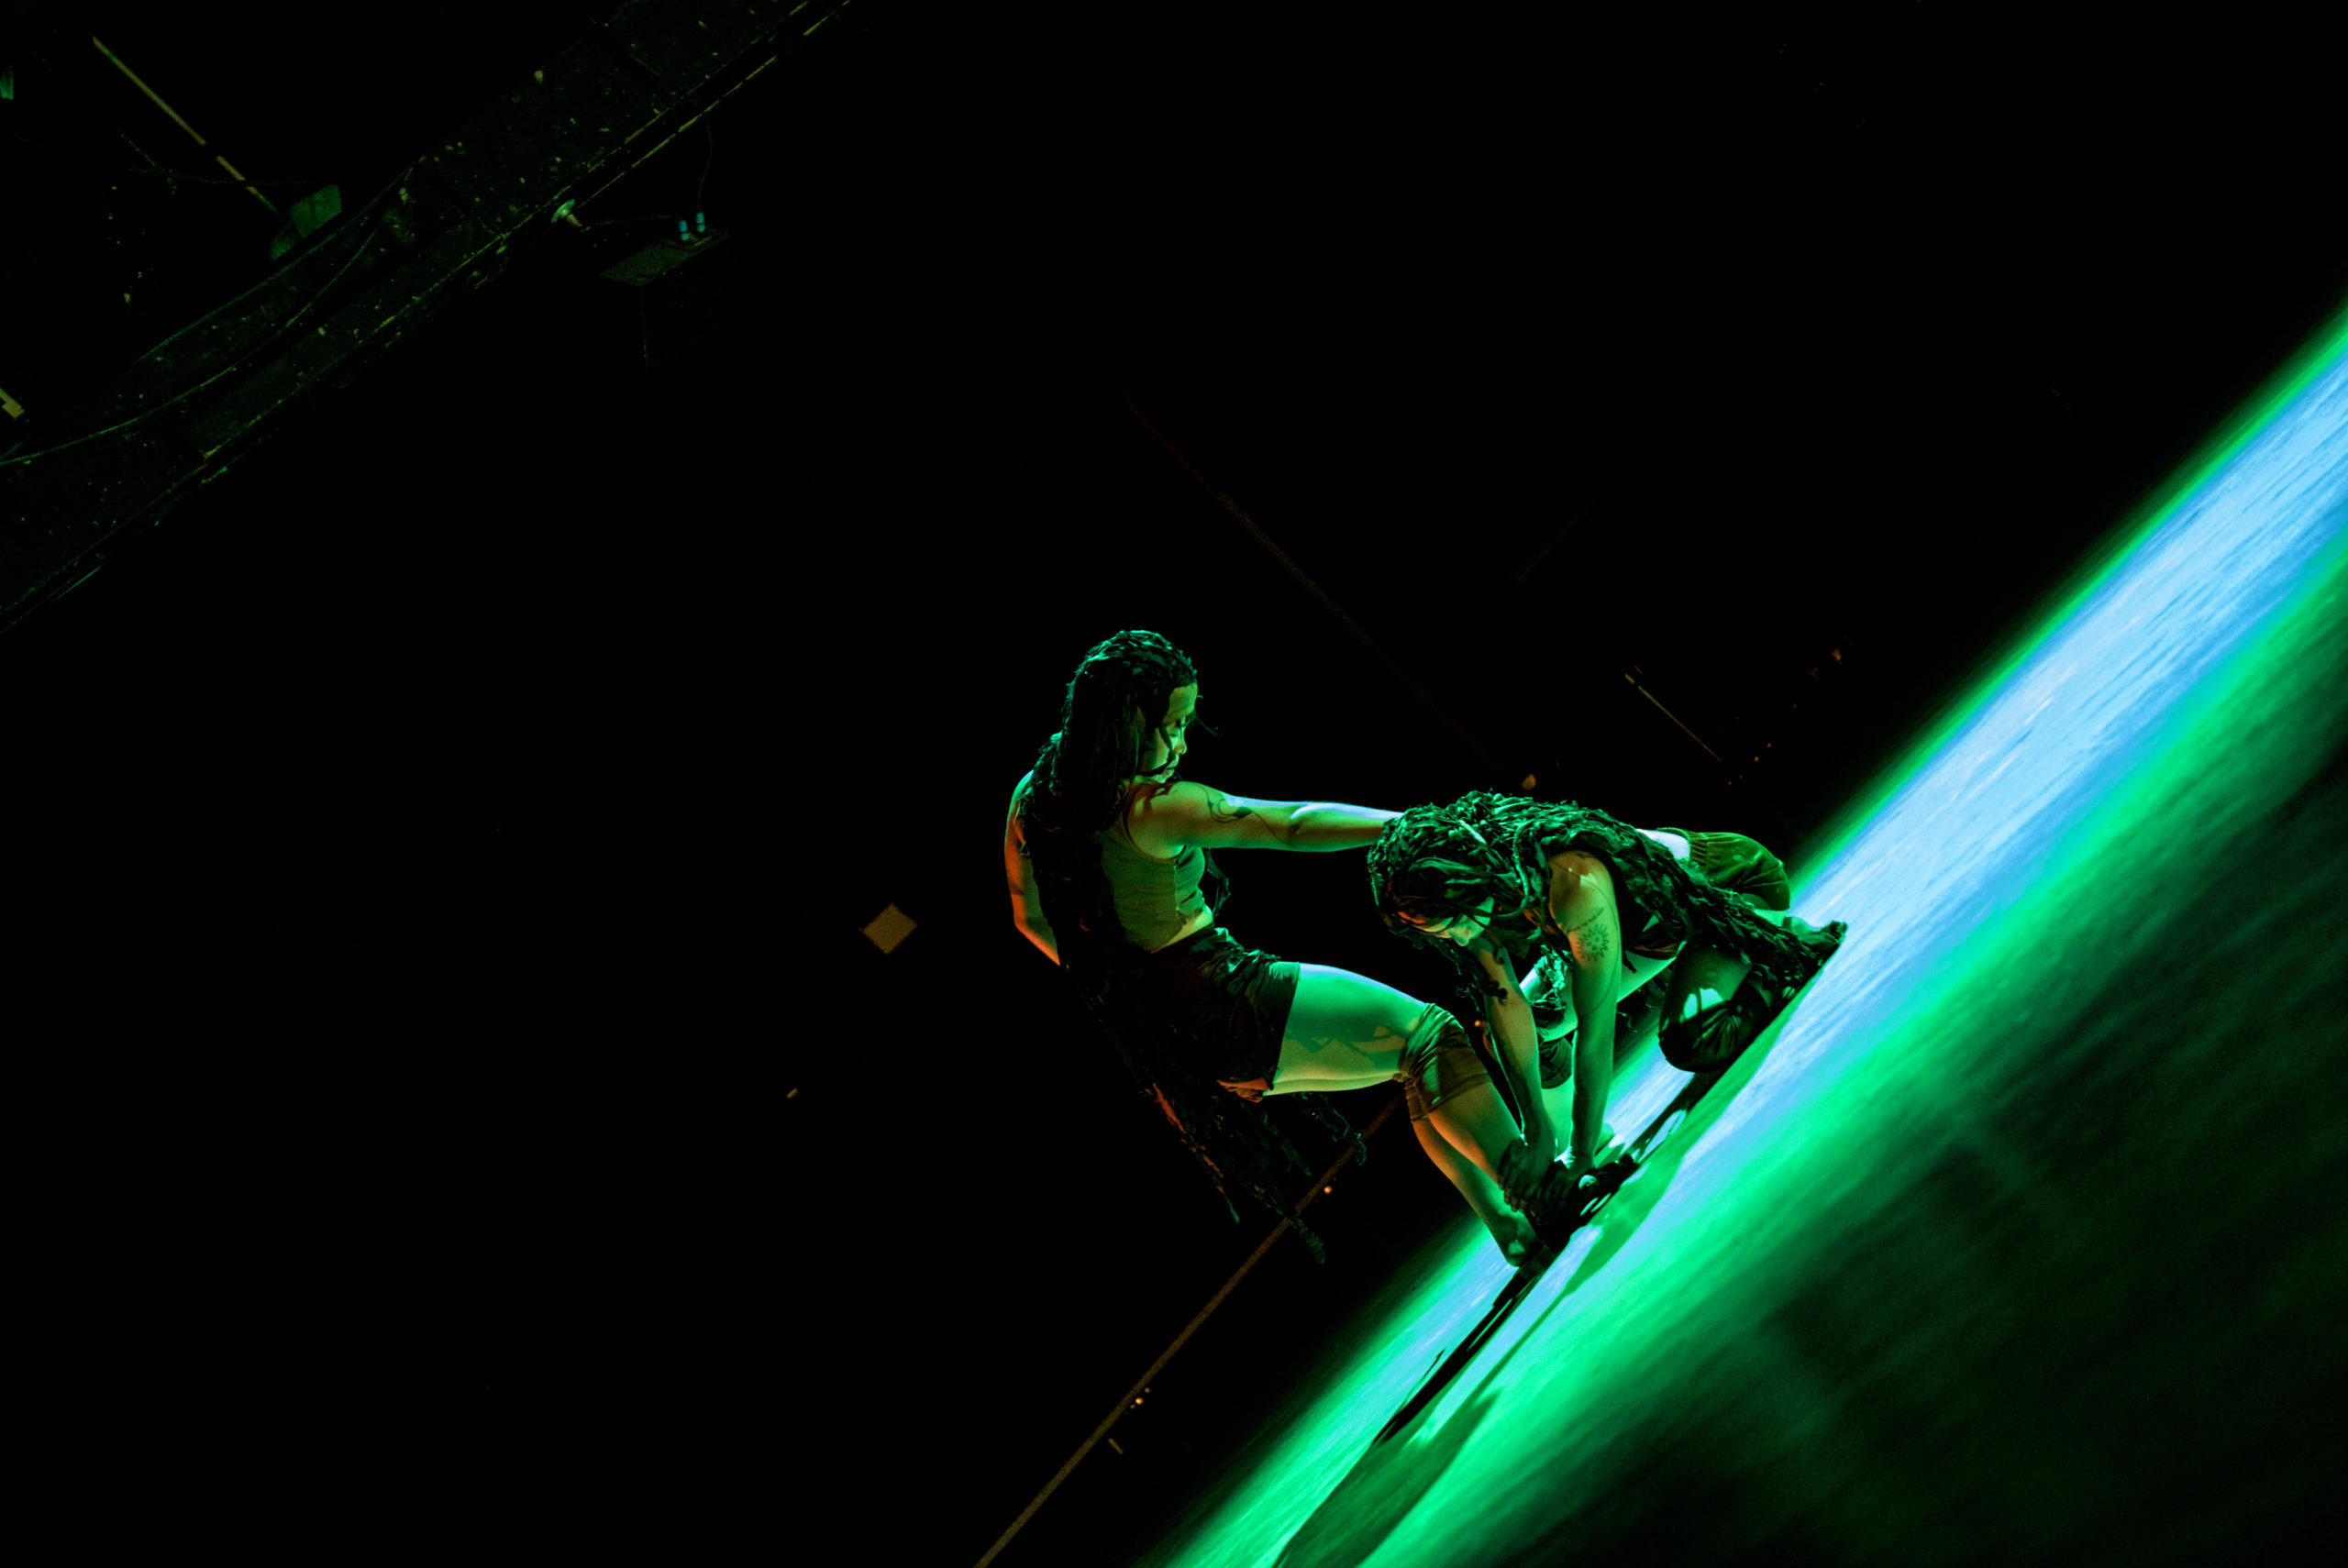 Two dancers, with long dark wigs covering their heads, perform on a wood-floored stage under green and blue lighting. One is crouched on the ground, the other stands over her arm wrapped around the back of the lower dancer’s neck.